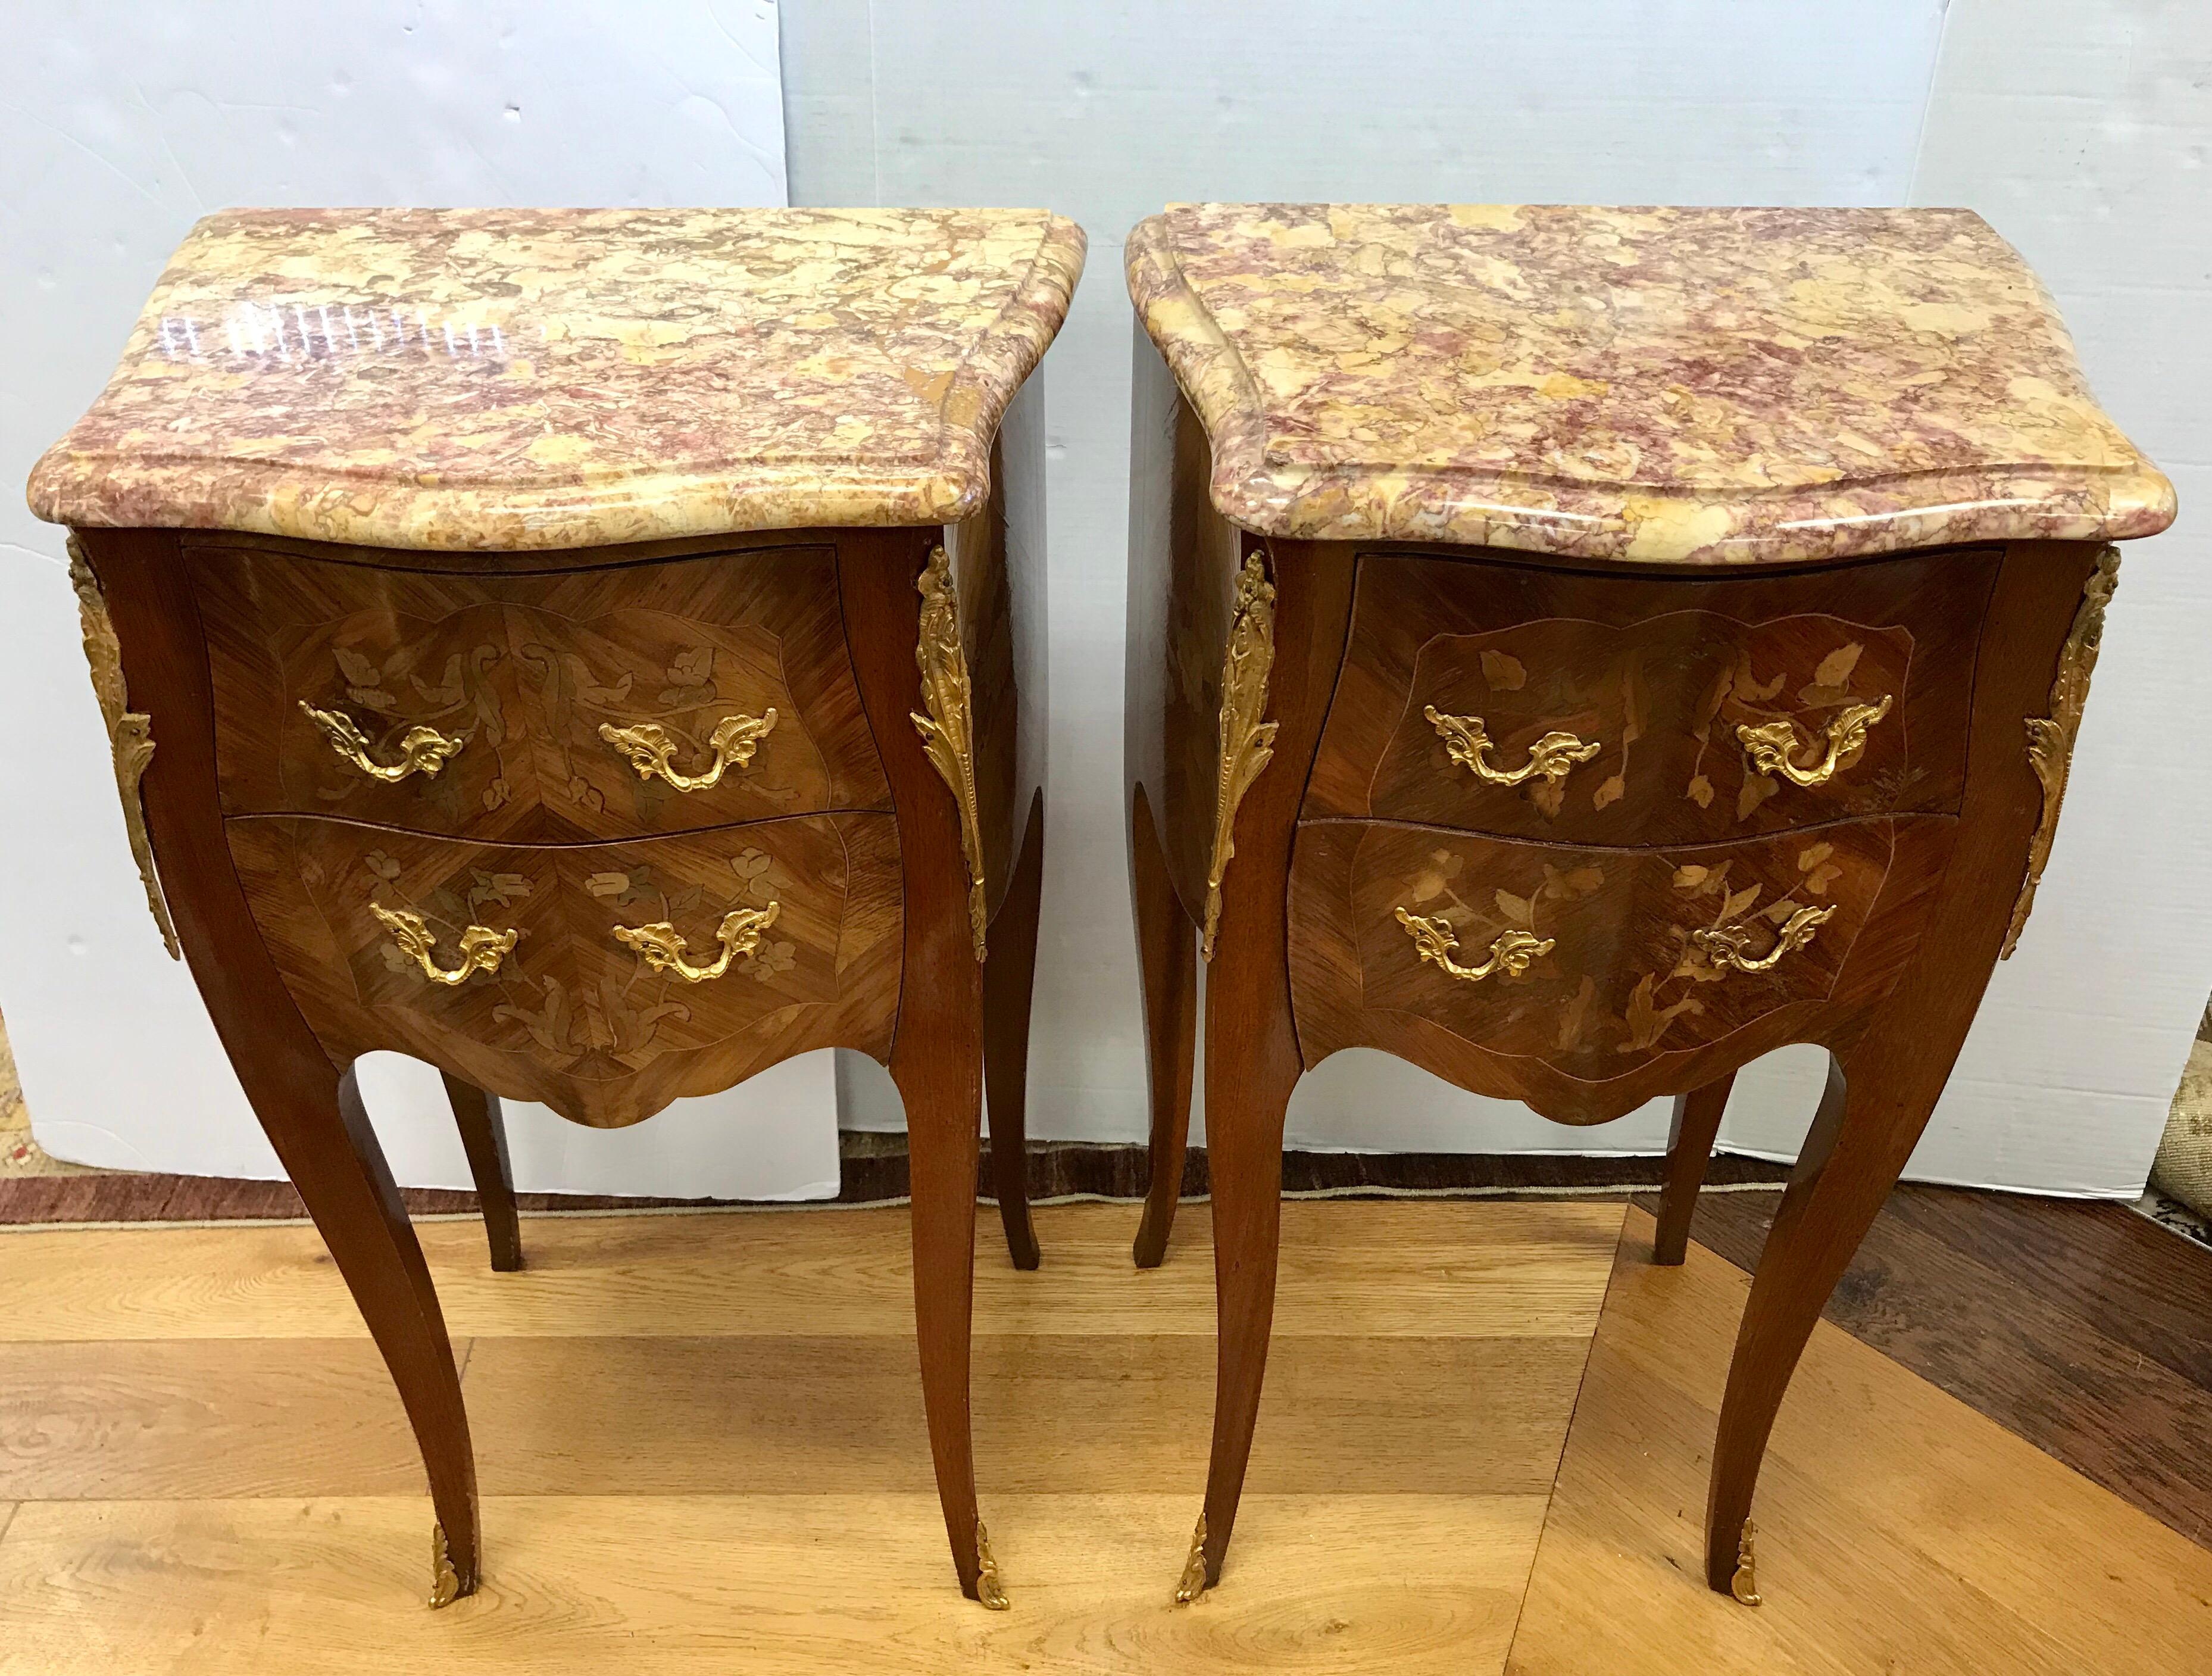 A stunning pair of French Louis XVI style parquetry marble-top two drawer bedside tables or nightstands with bronze mounts and marble tops. Beautiful floral marquetry on front and sides.